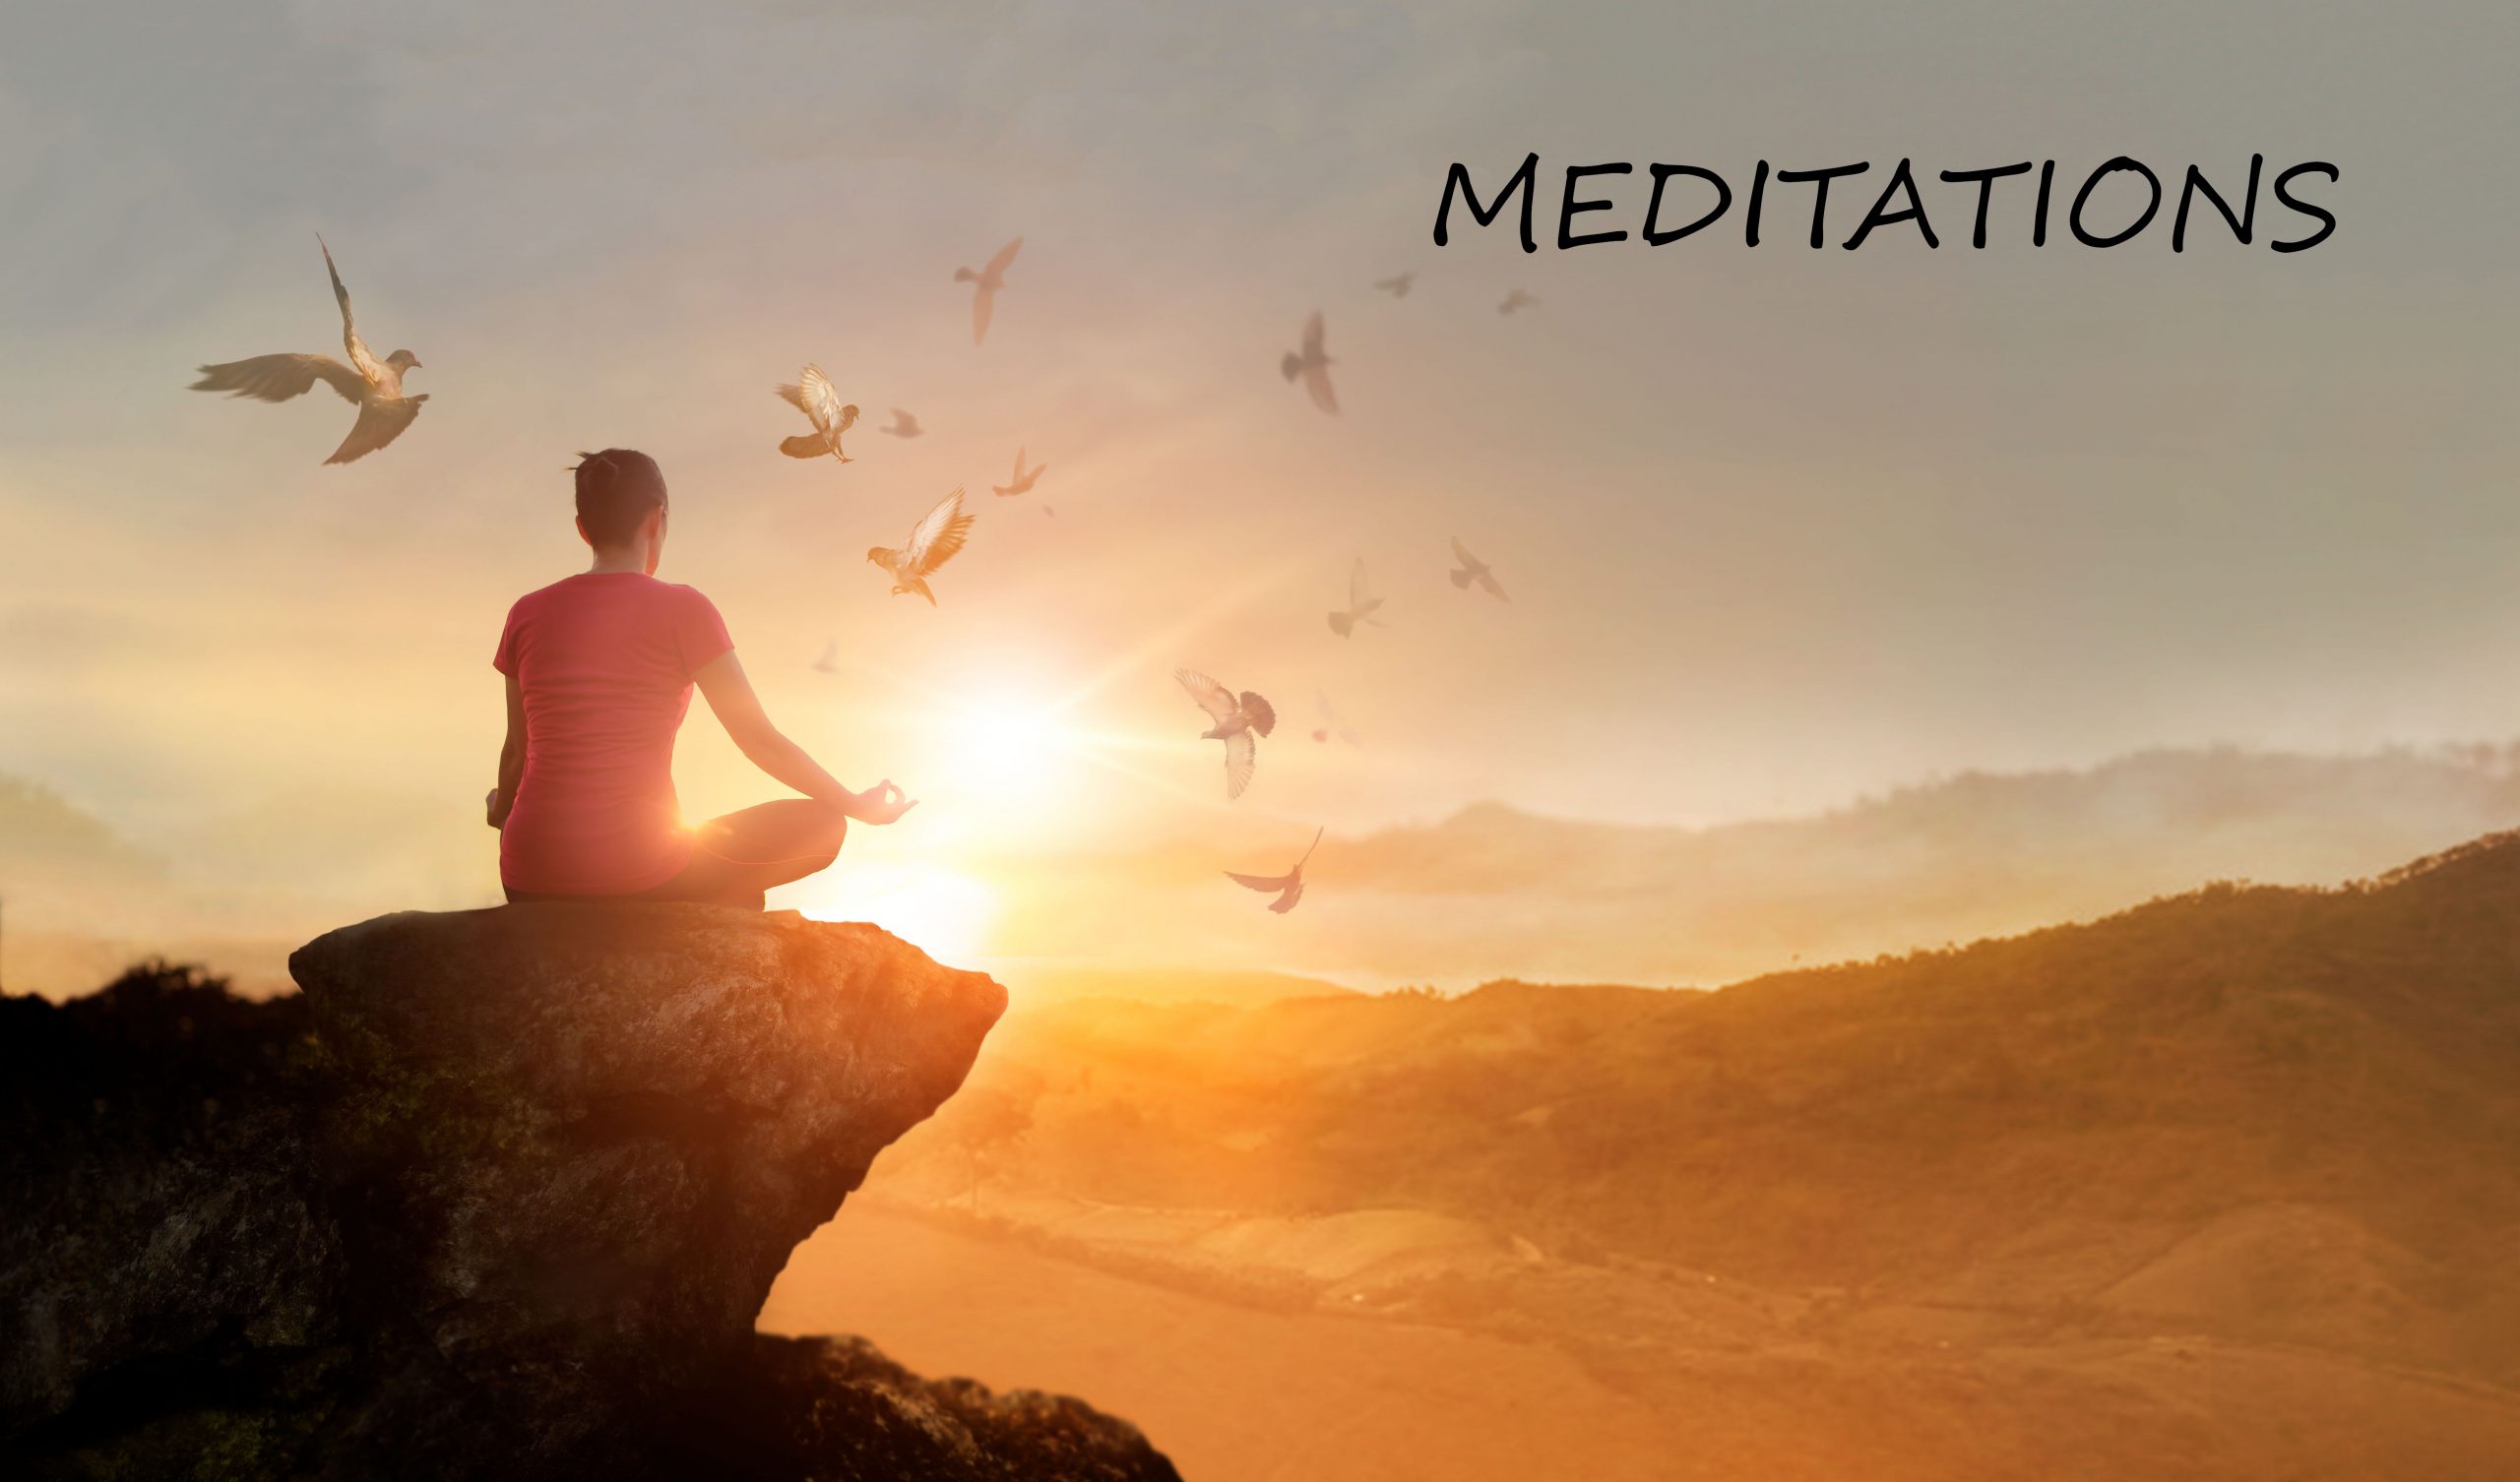 Woman practices meditating and praying with free bird enjoying nature on the mountain sunset background, hope and faith concept.